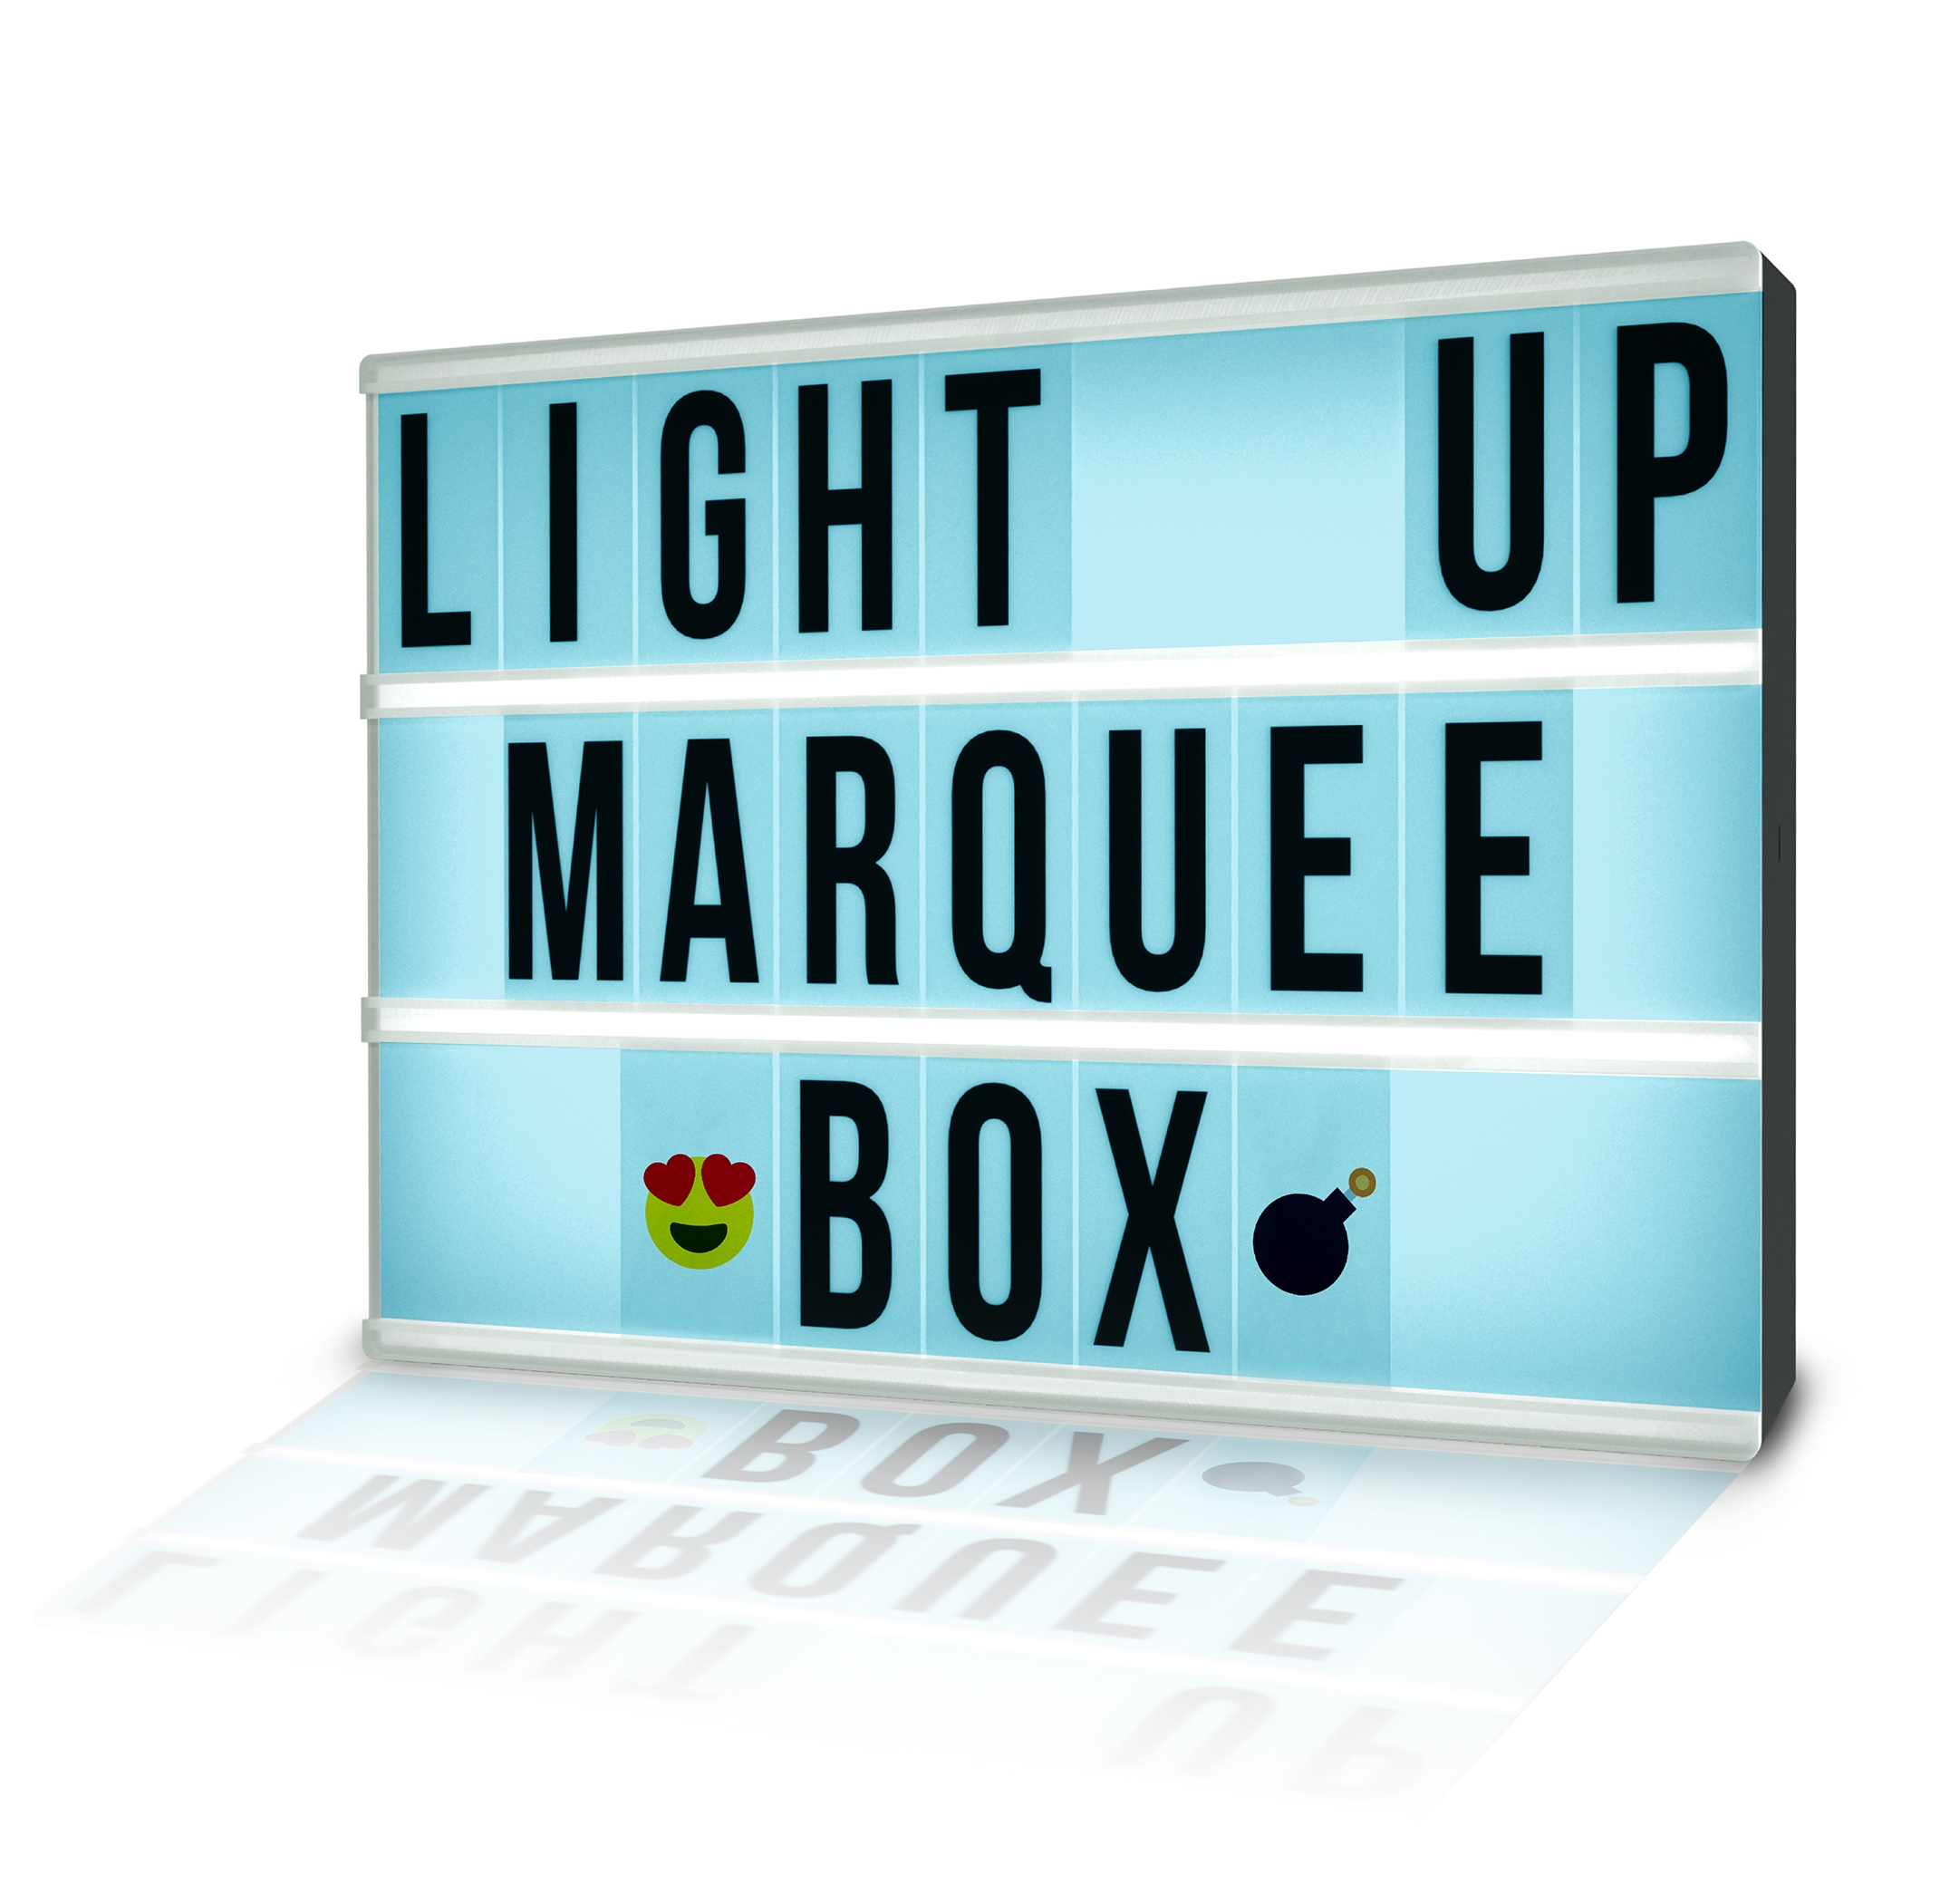 auraLED Colorbox LED Marquee - Multi-Color Light-up Marquee Box with Remote, Alphabet, Symbols - image 1 of 10